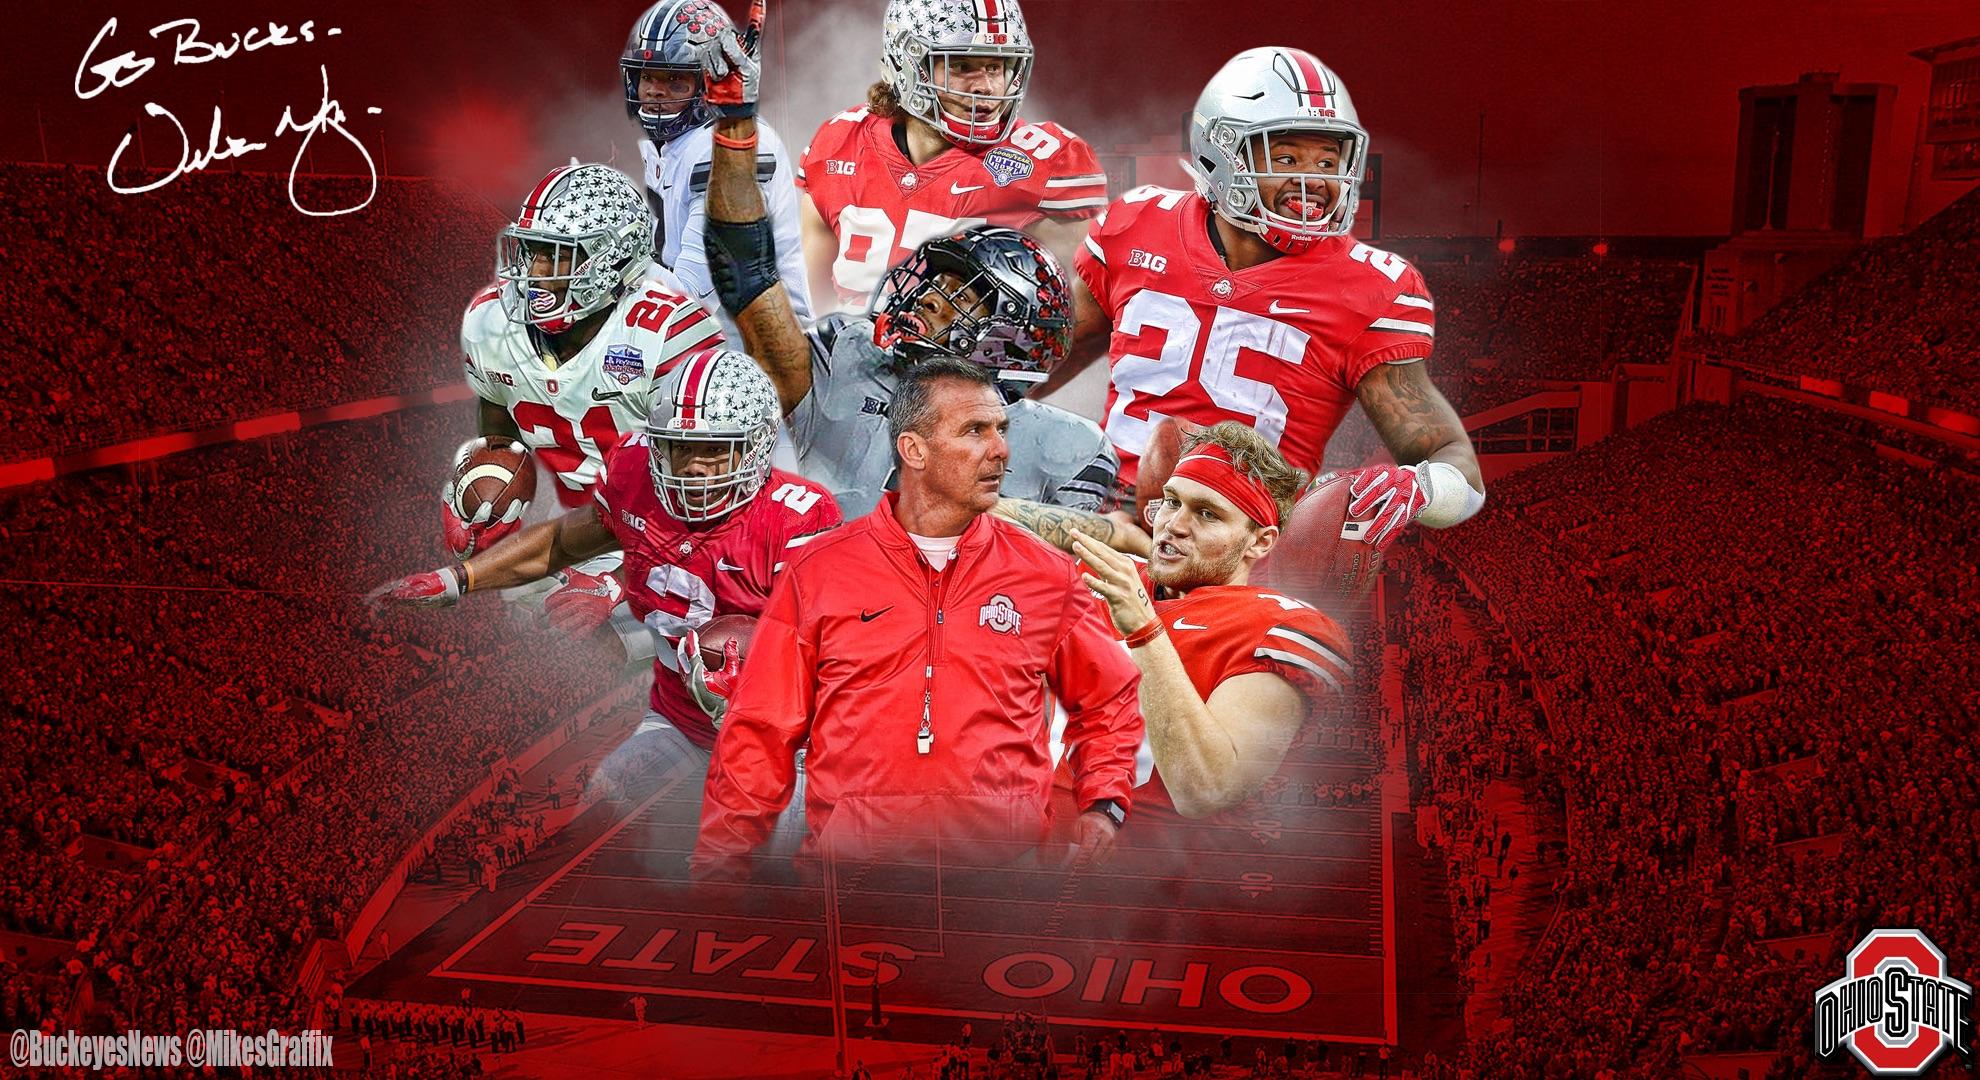 Made an Ohio State Wallpaper for an OSU page I started working with, what do you guys think?